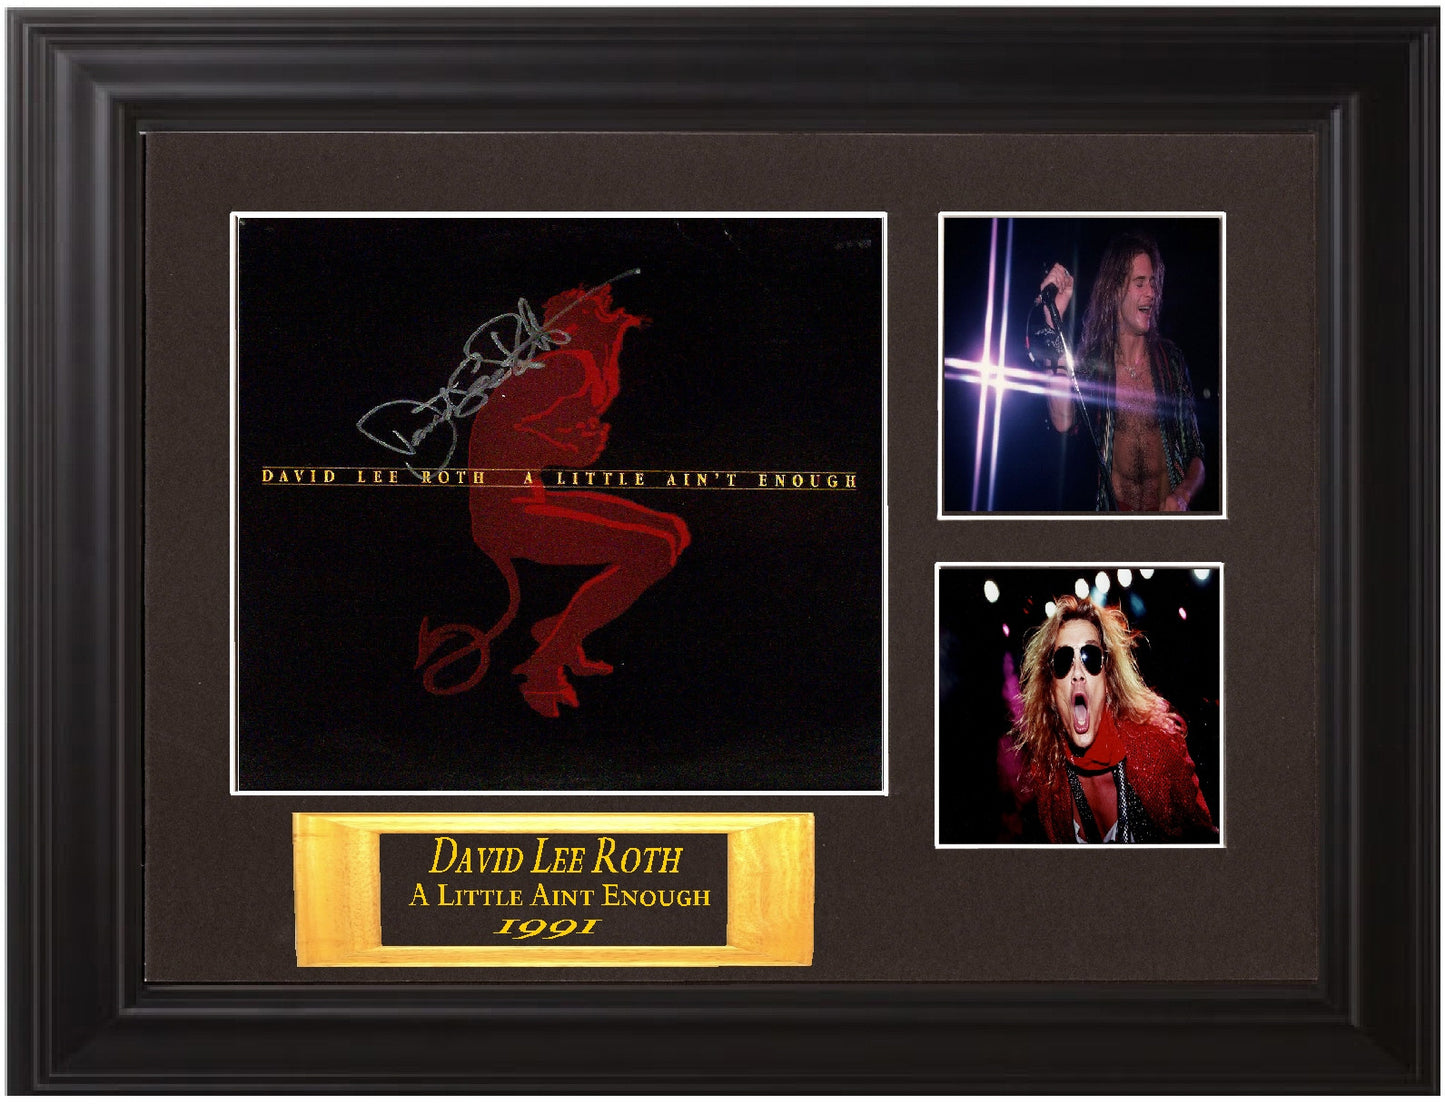 David Lee Roth Autographed lp - Zion Graphic Collectibles